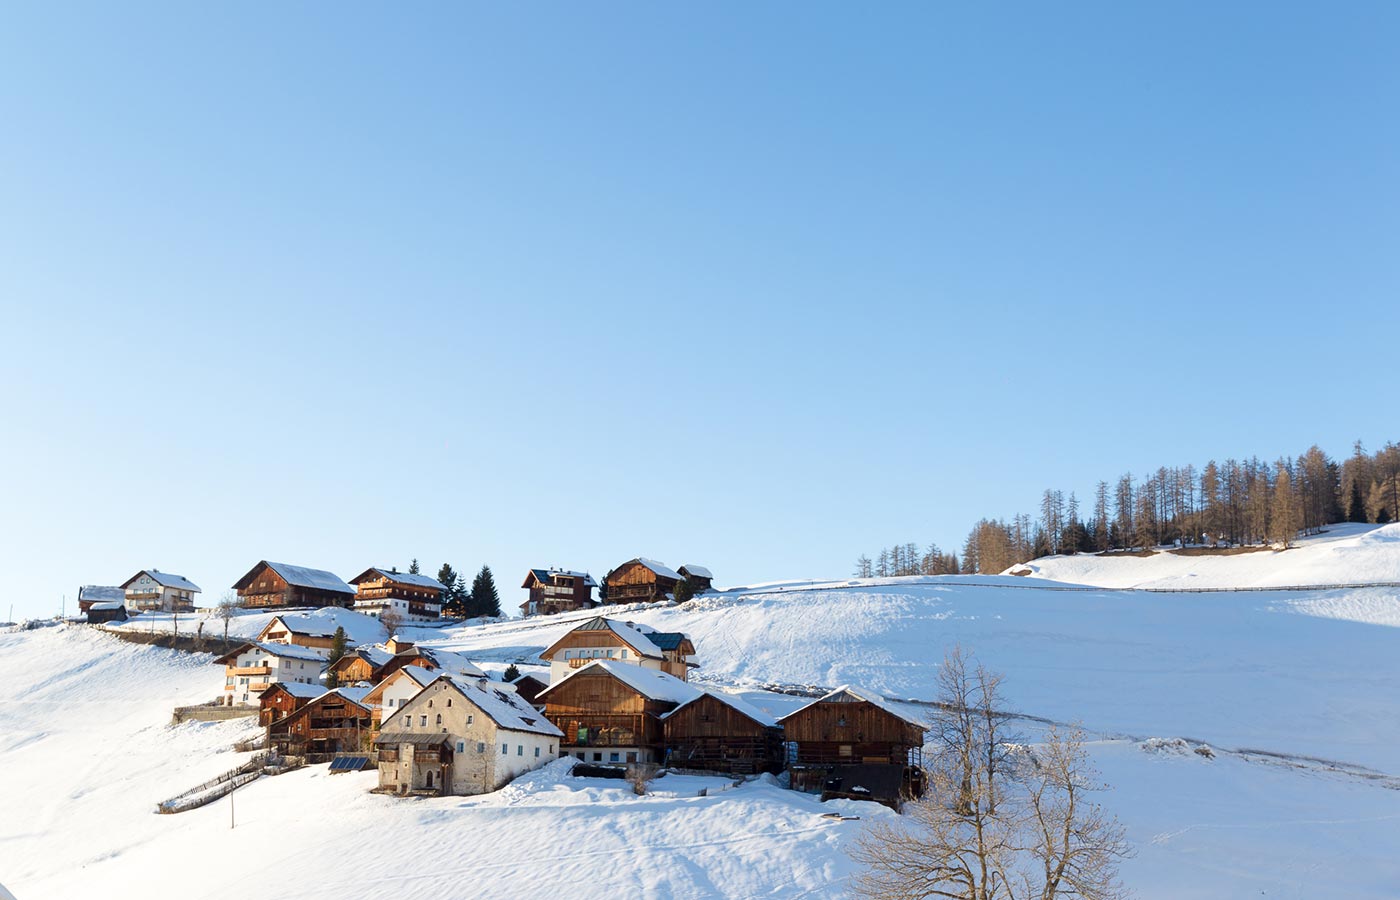 Mountain huts in the Dolomite snow